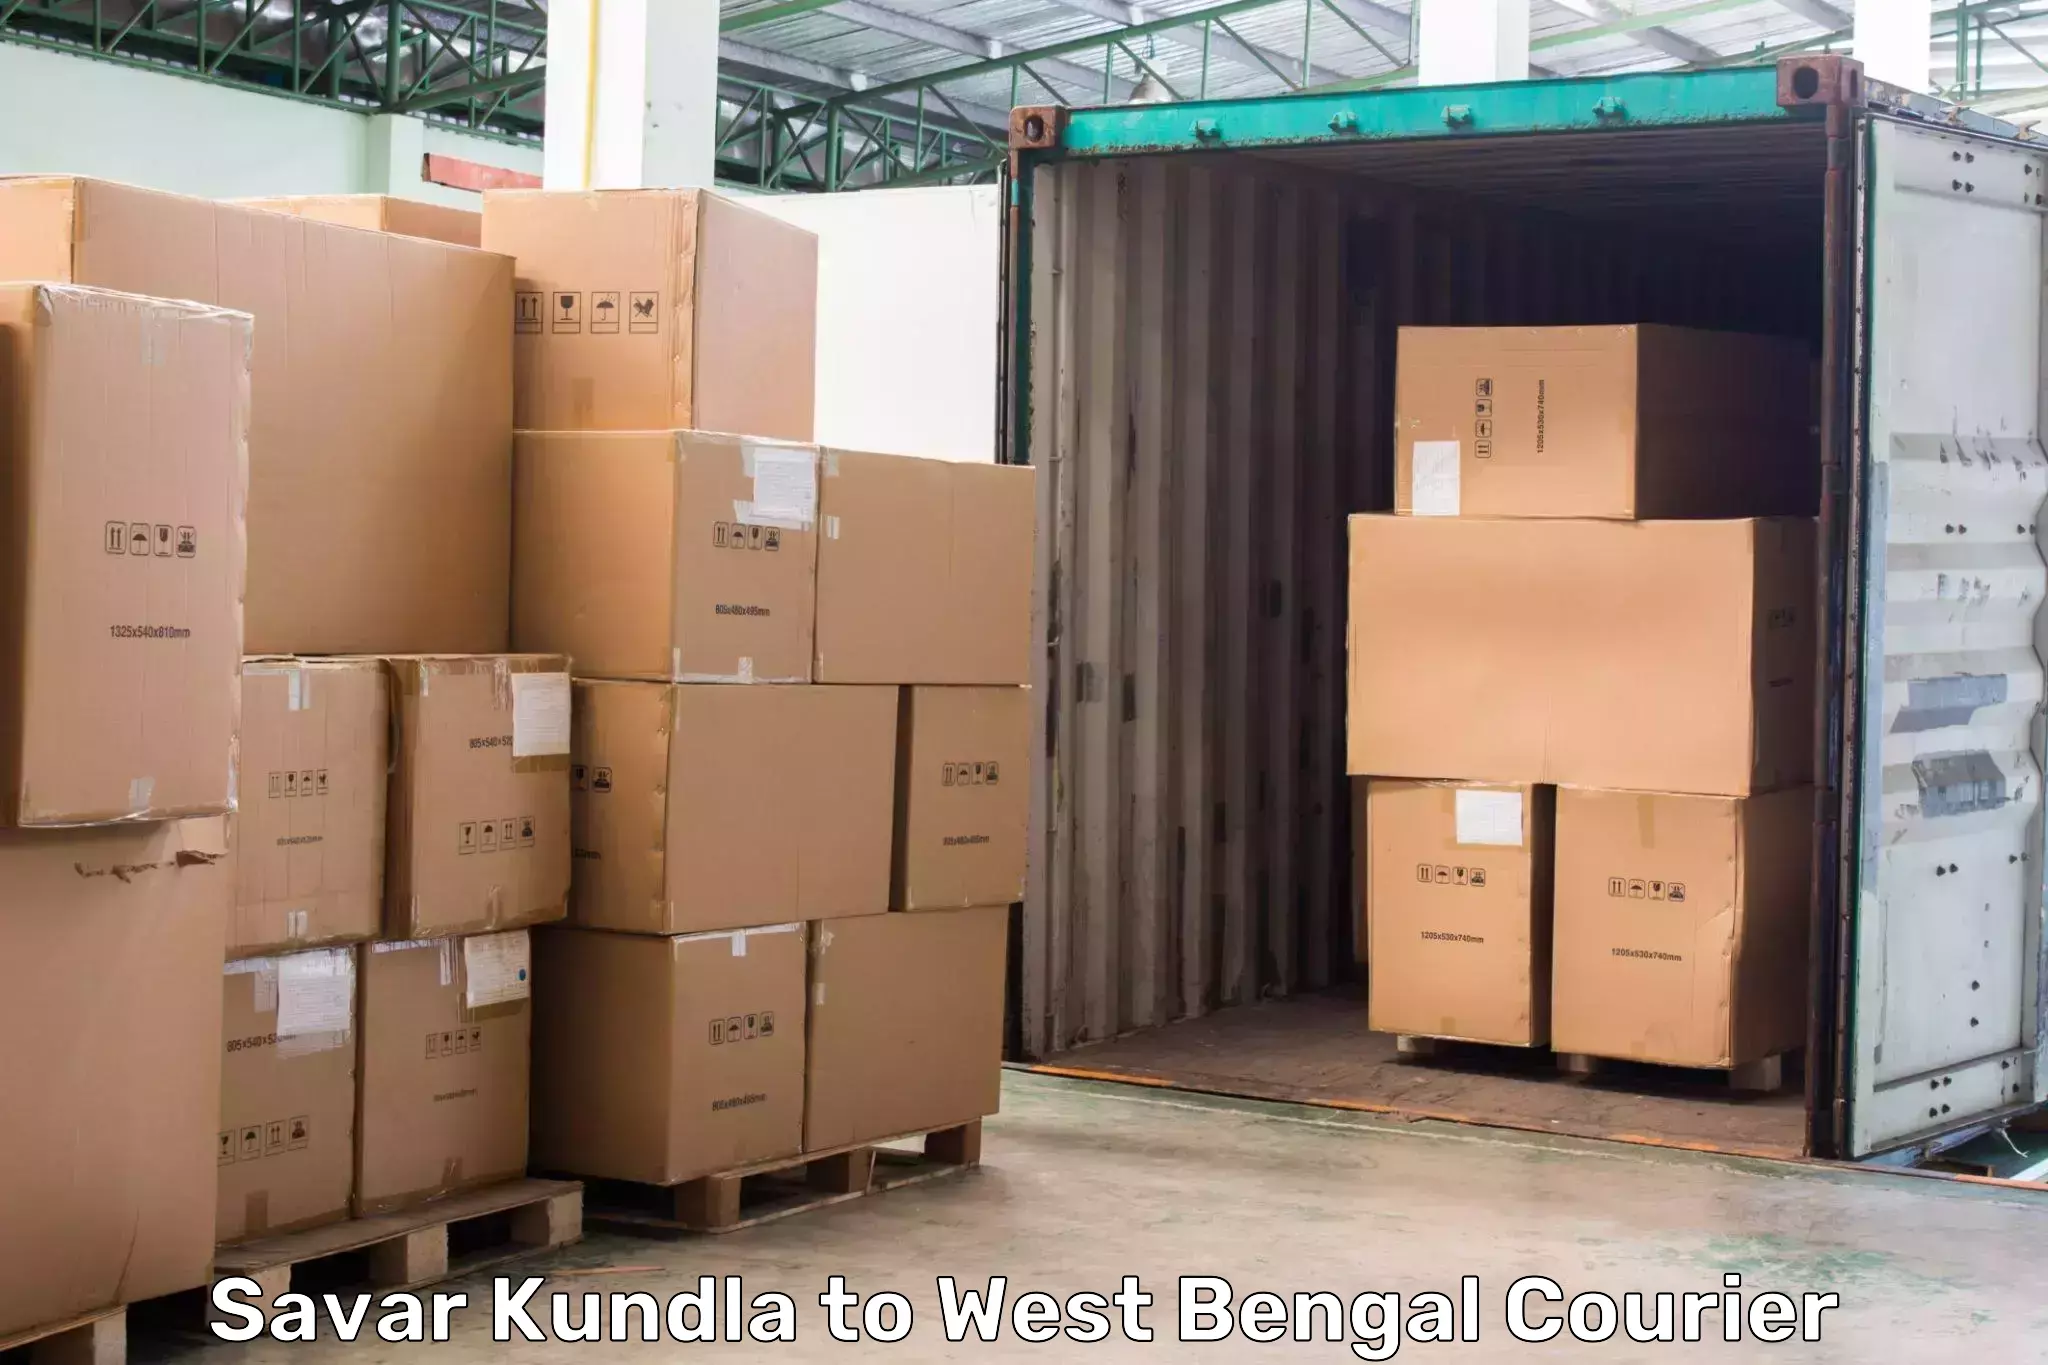 Local courier options Savar Kundla to West Bengal